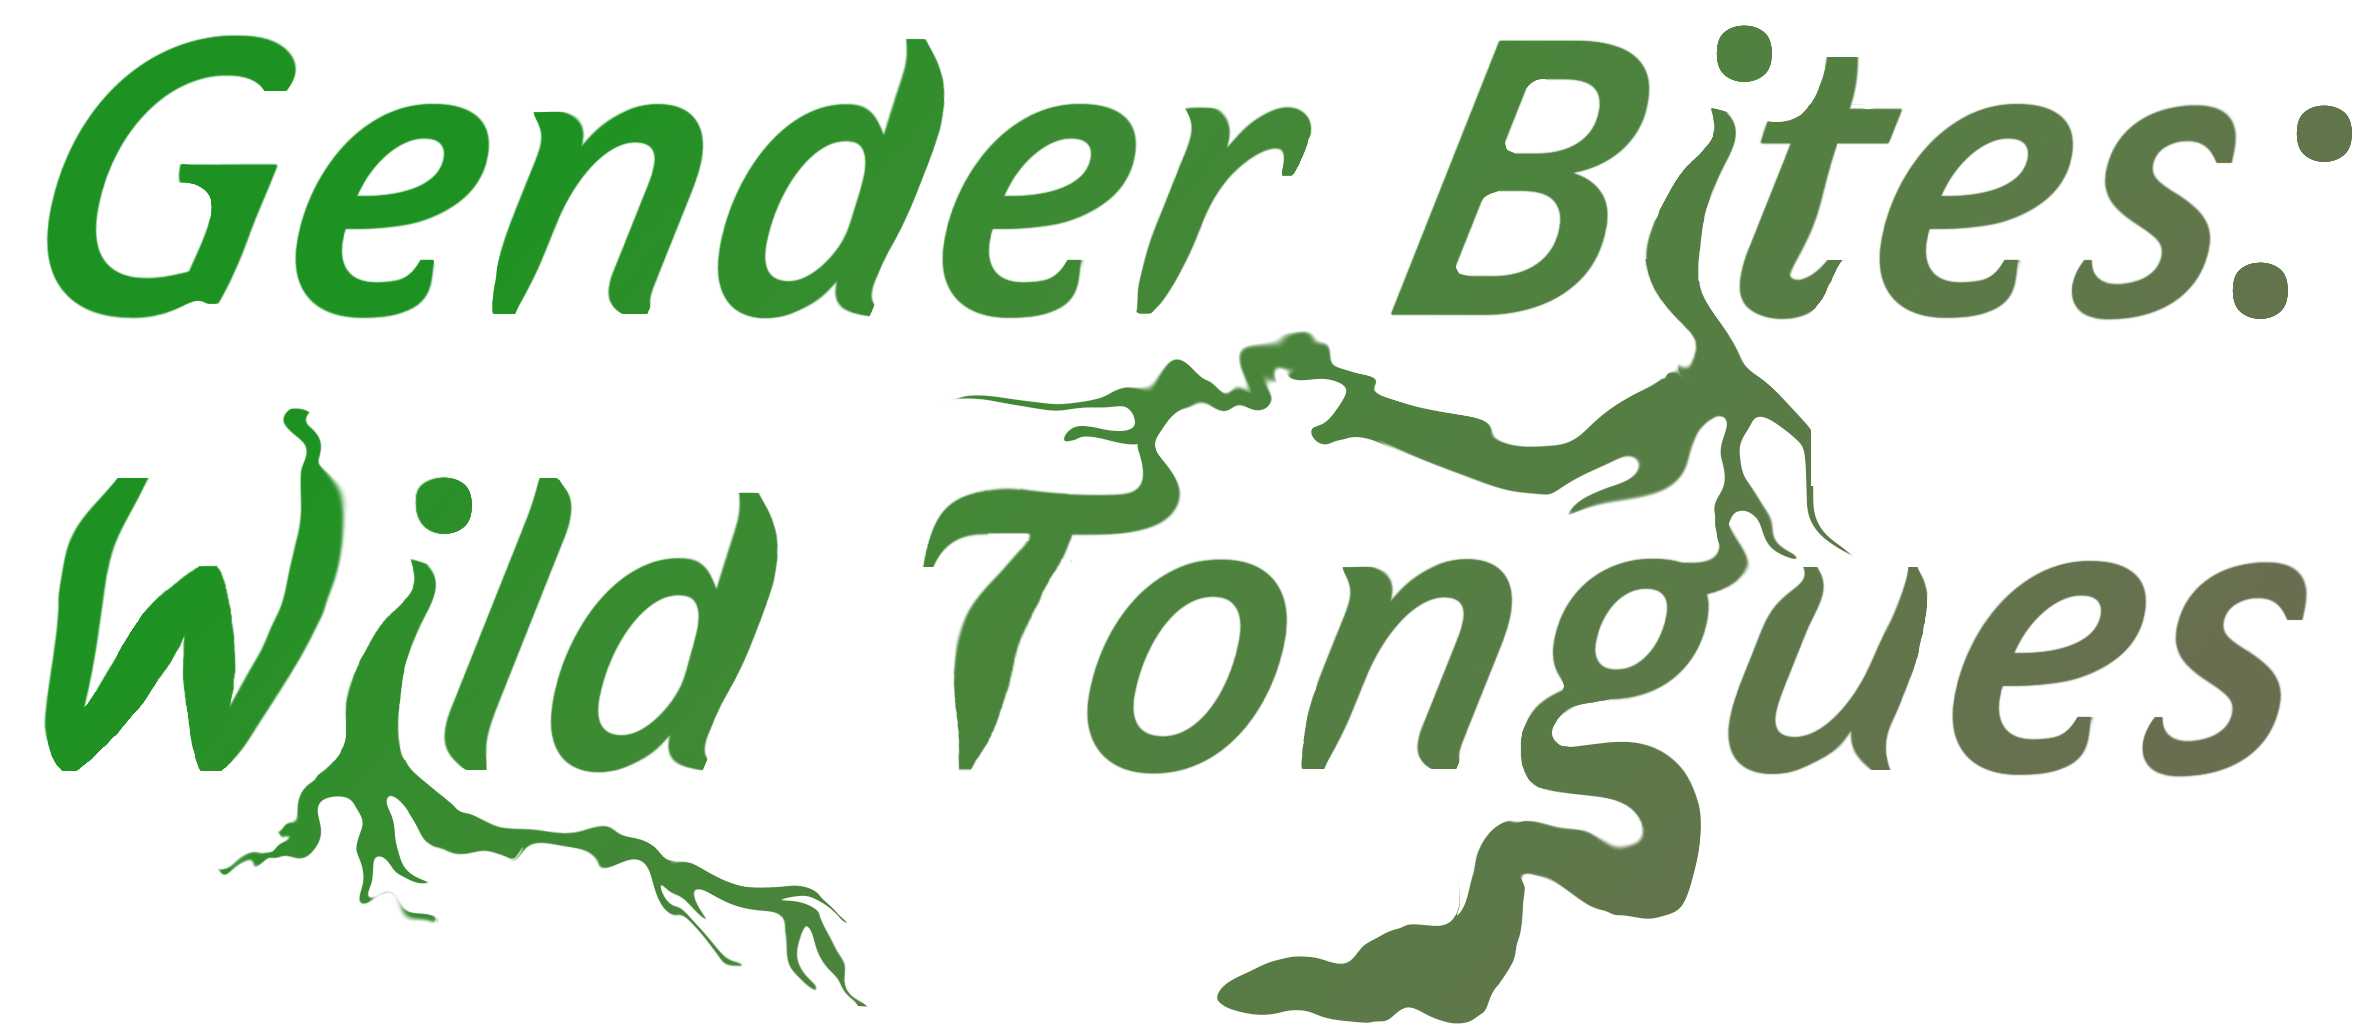 'Gender Bites: Wild Tongues'. Tongues and roots are lazily protruding from the letters.